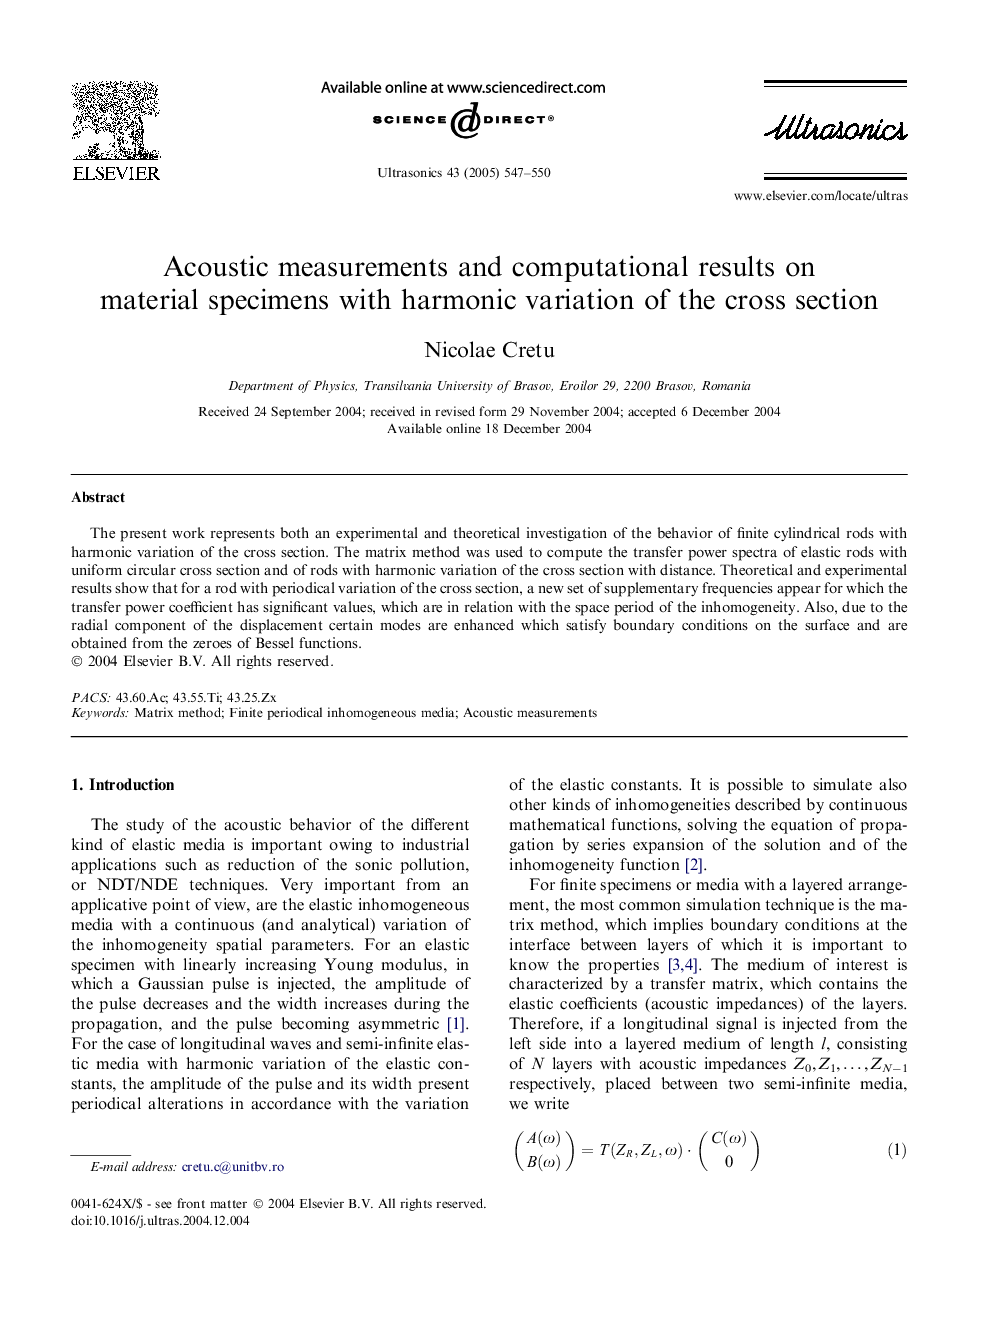 Acoustic measurements and computational results on material specimens with harmonic variation of the cross section